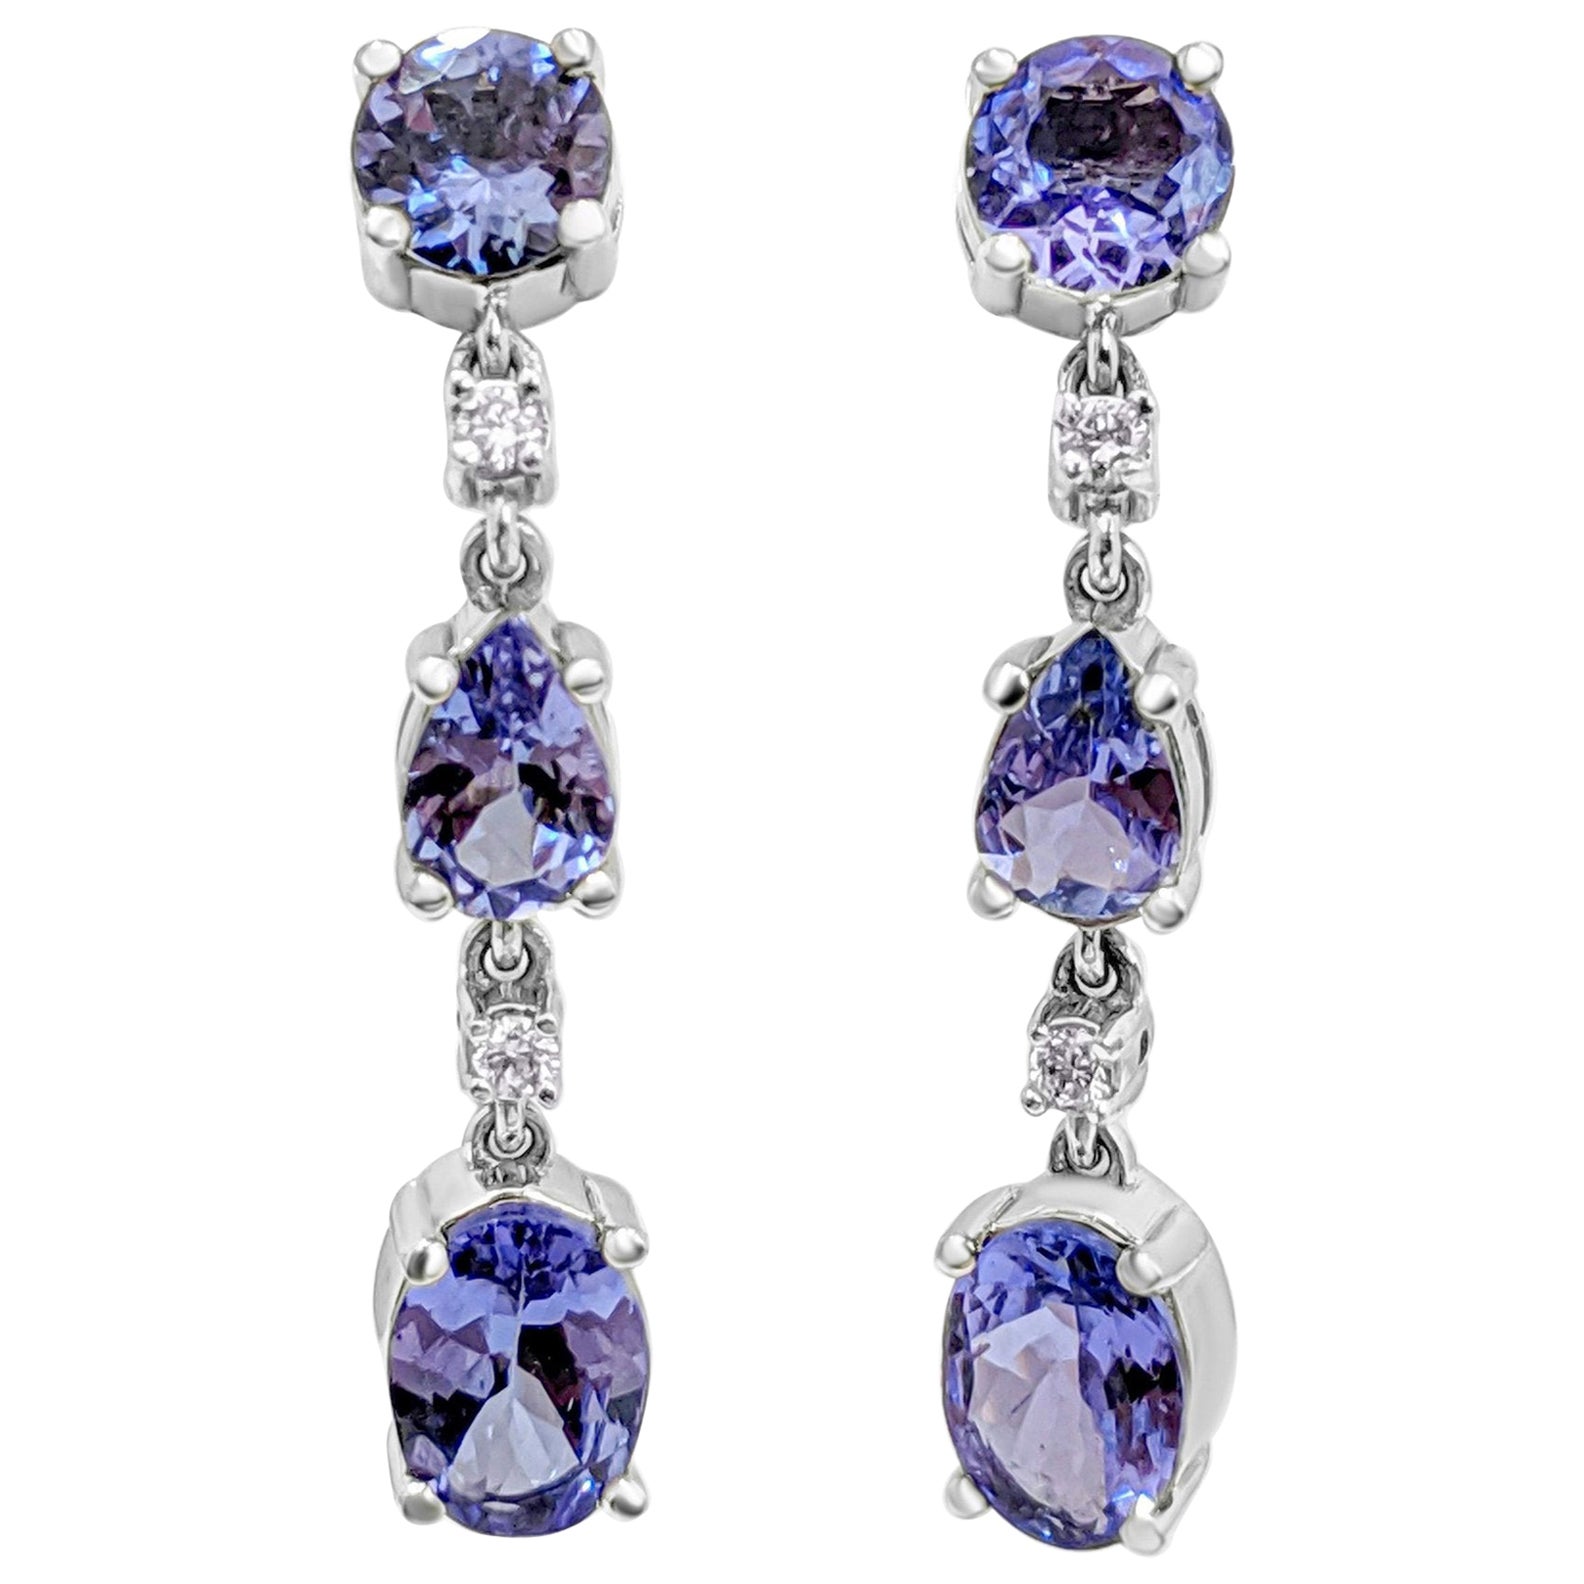 NO RESERVE! 3.32Ct Tanzanite and 0.15Ct Diamonds 14 kt. White gold Earrings For Sale